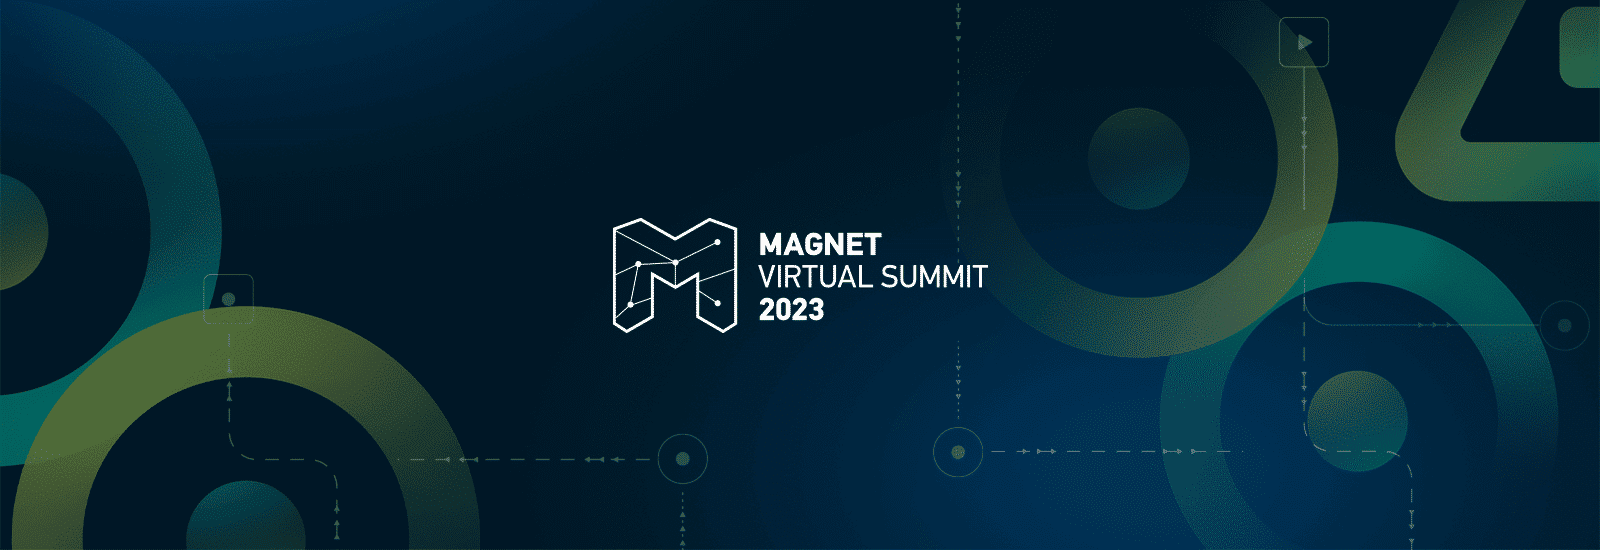 Generic blog header for the 2023 Magnet Virtual Summit